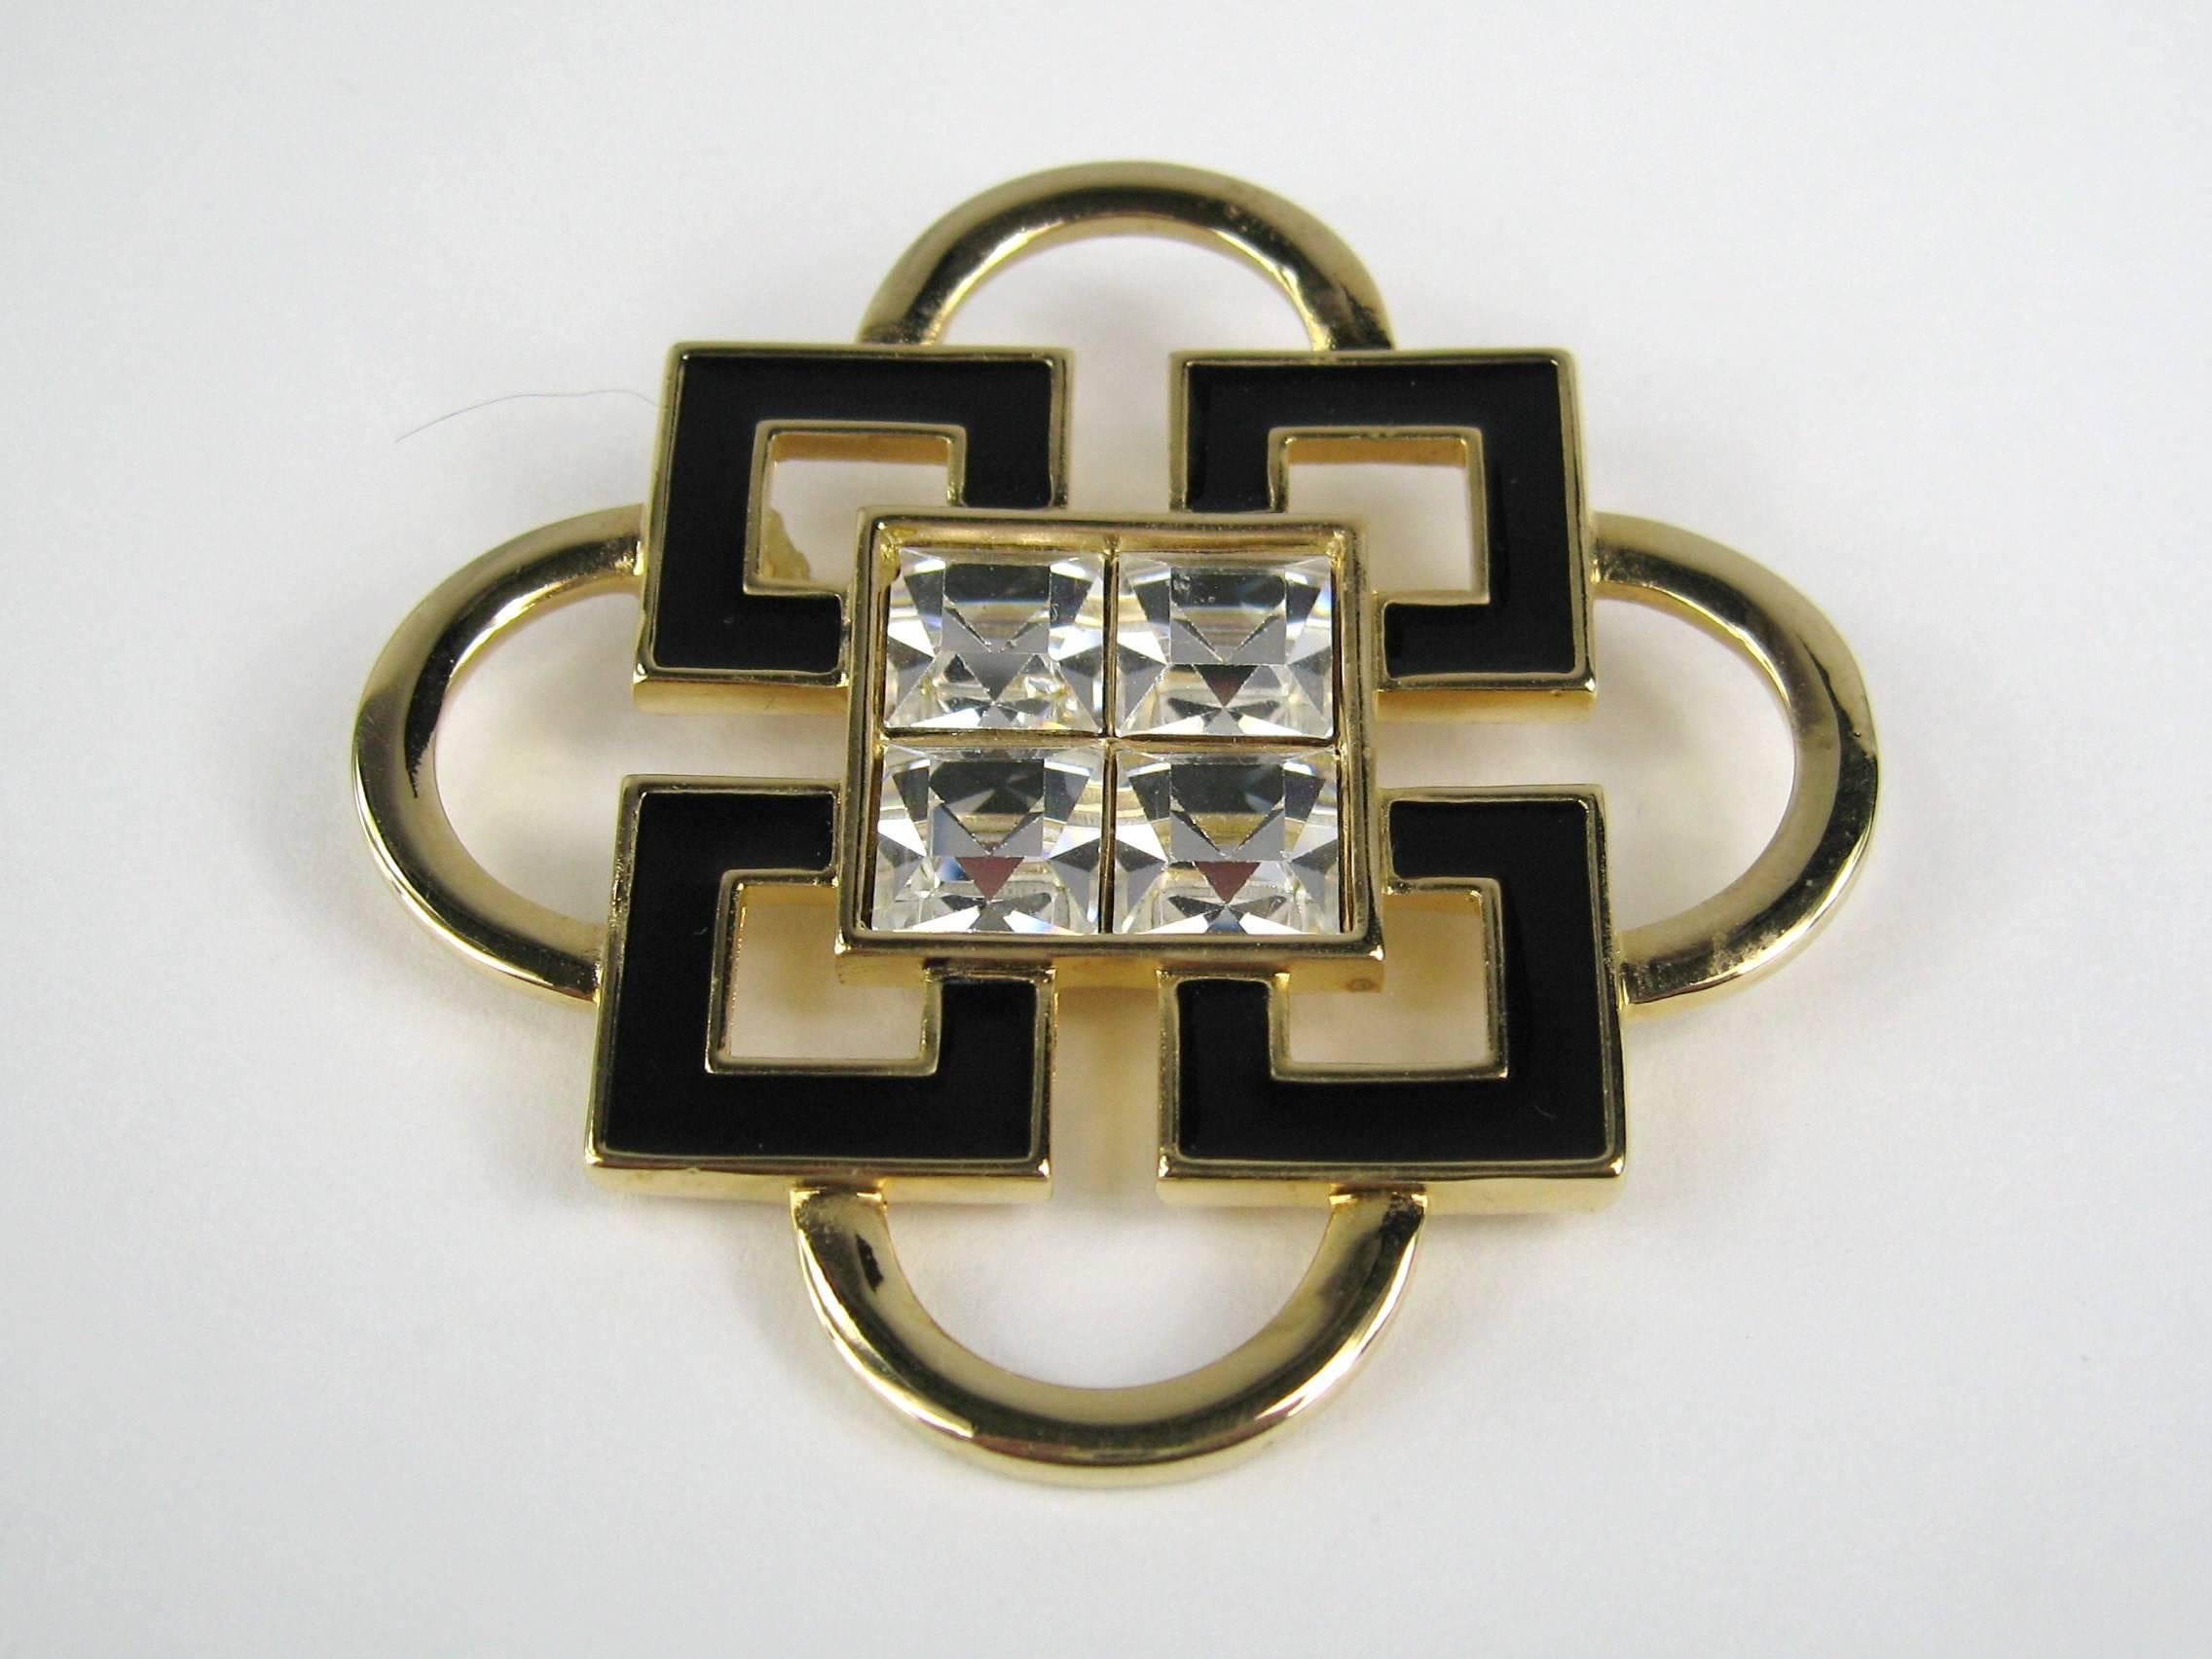 New Old Stock Swarovski Vintage Brooch. 
Great Sparkle! 
Large Bezel set crystals in the center, surrounded by Black Enamel.
Sure makes a statement! Classic 
measures 
 55.79mm or 2.19